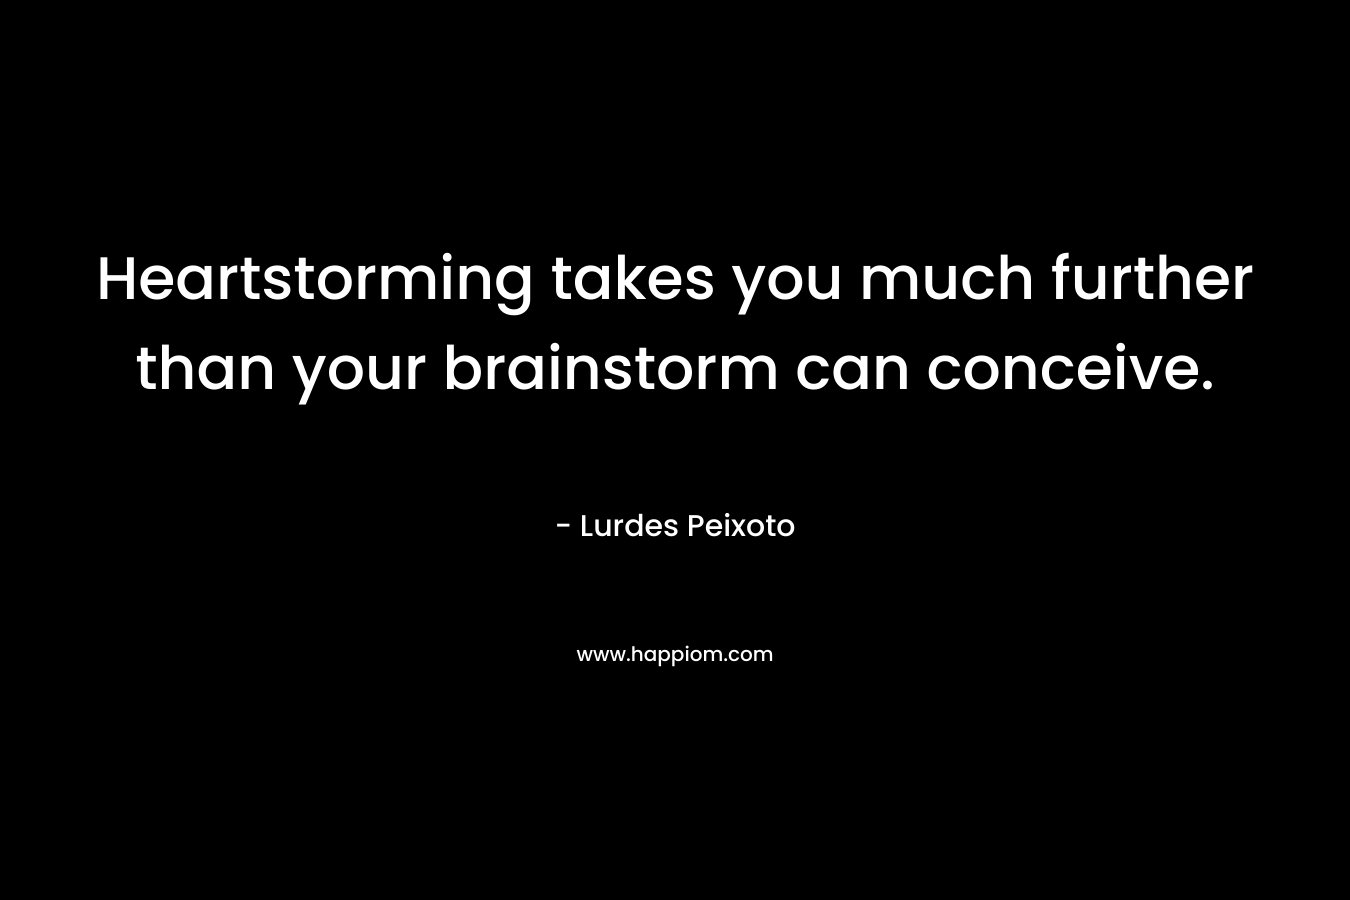 Heartstorming takes you much further than your brainstorm can conceive.